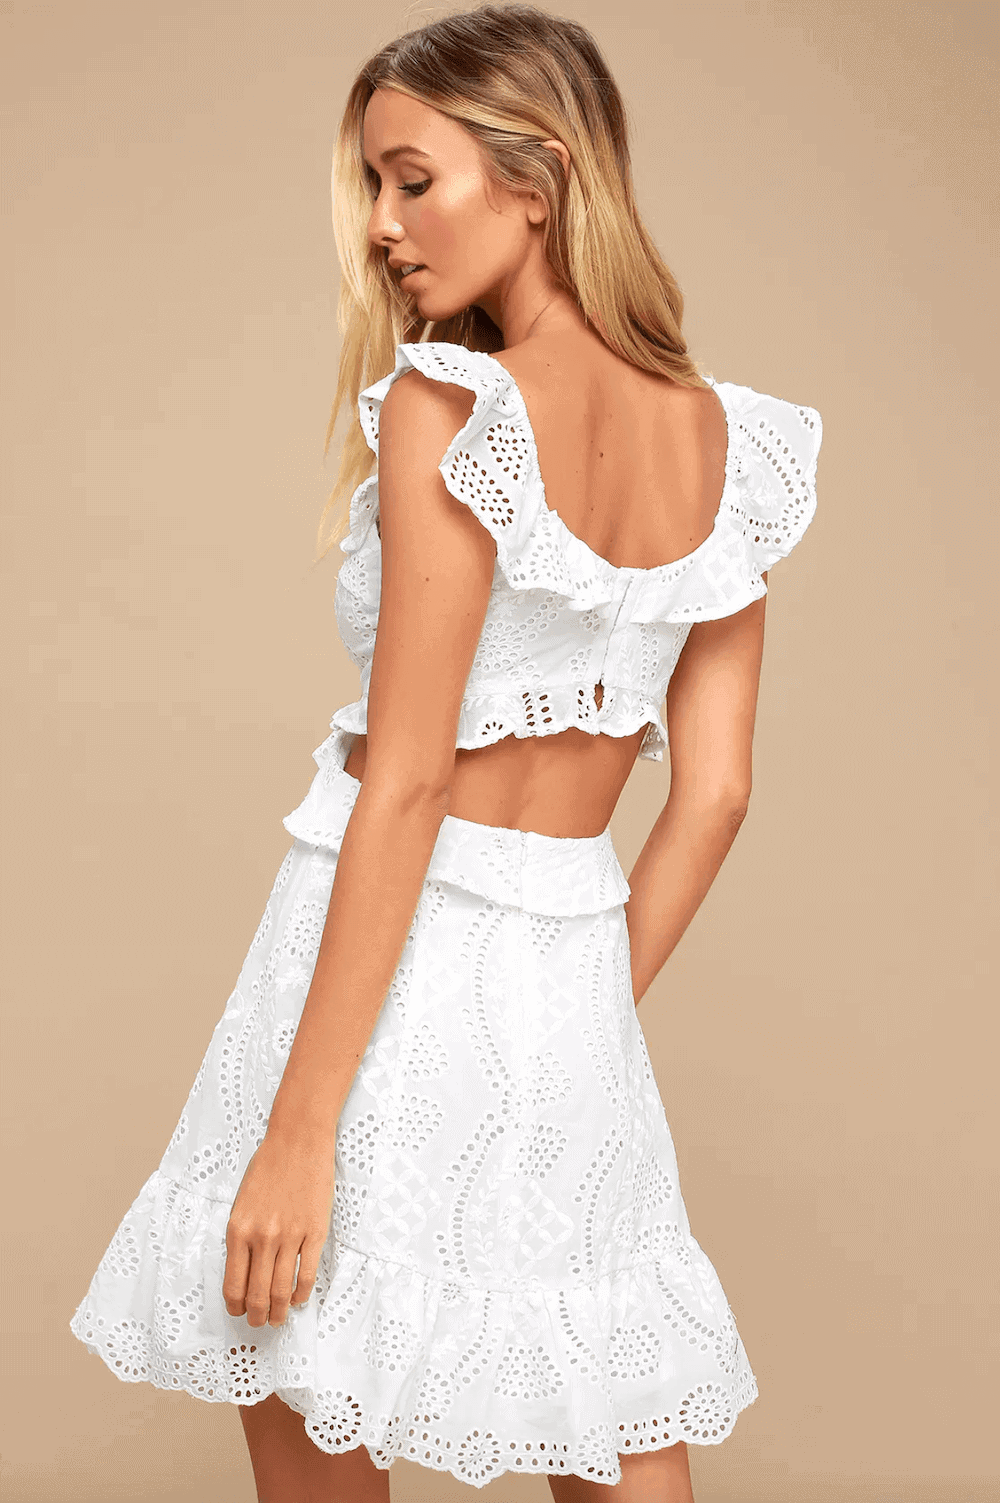 Summer Outfits Sundresses Beach Casual Ivory Eyelet Lace Cutout Skater Dress Lulus 2